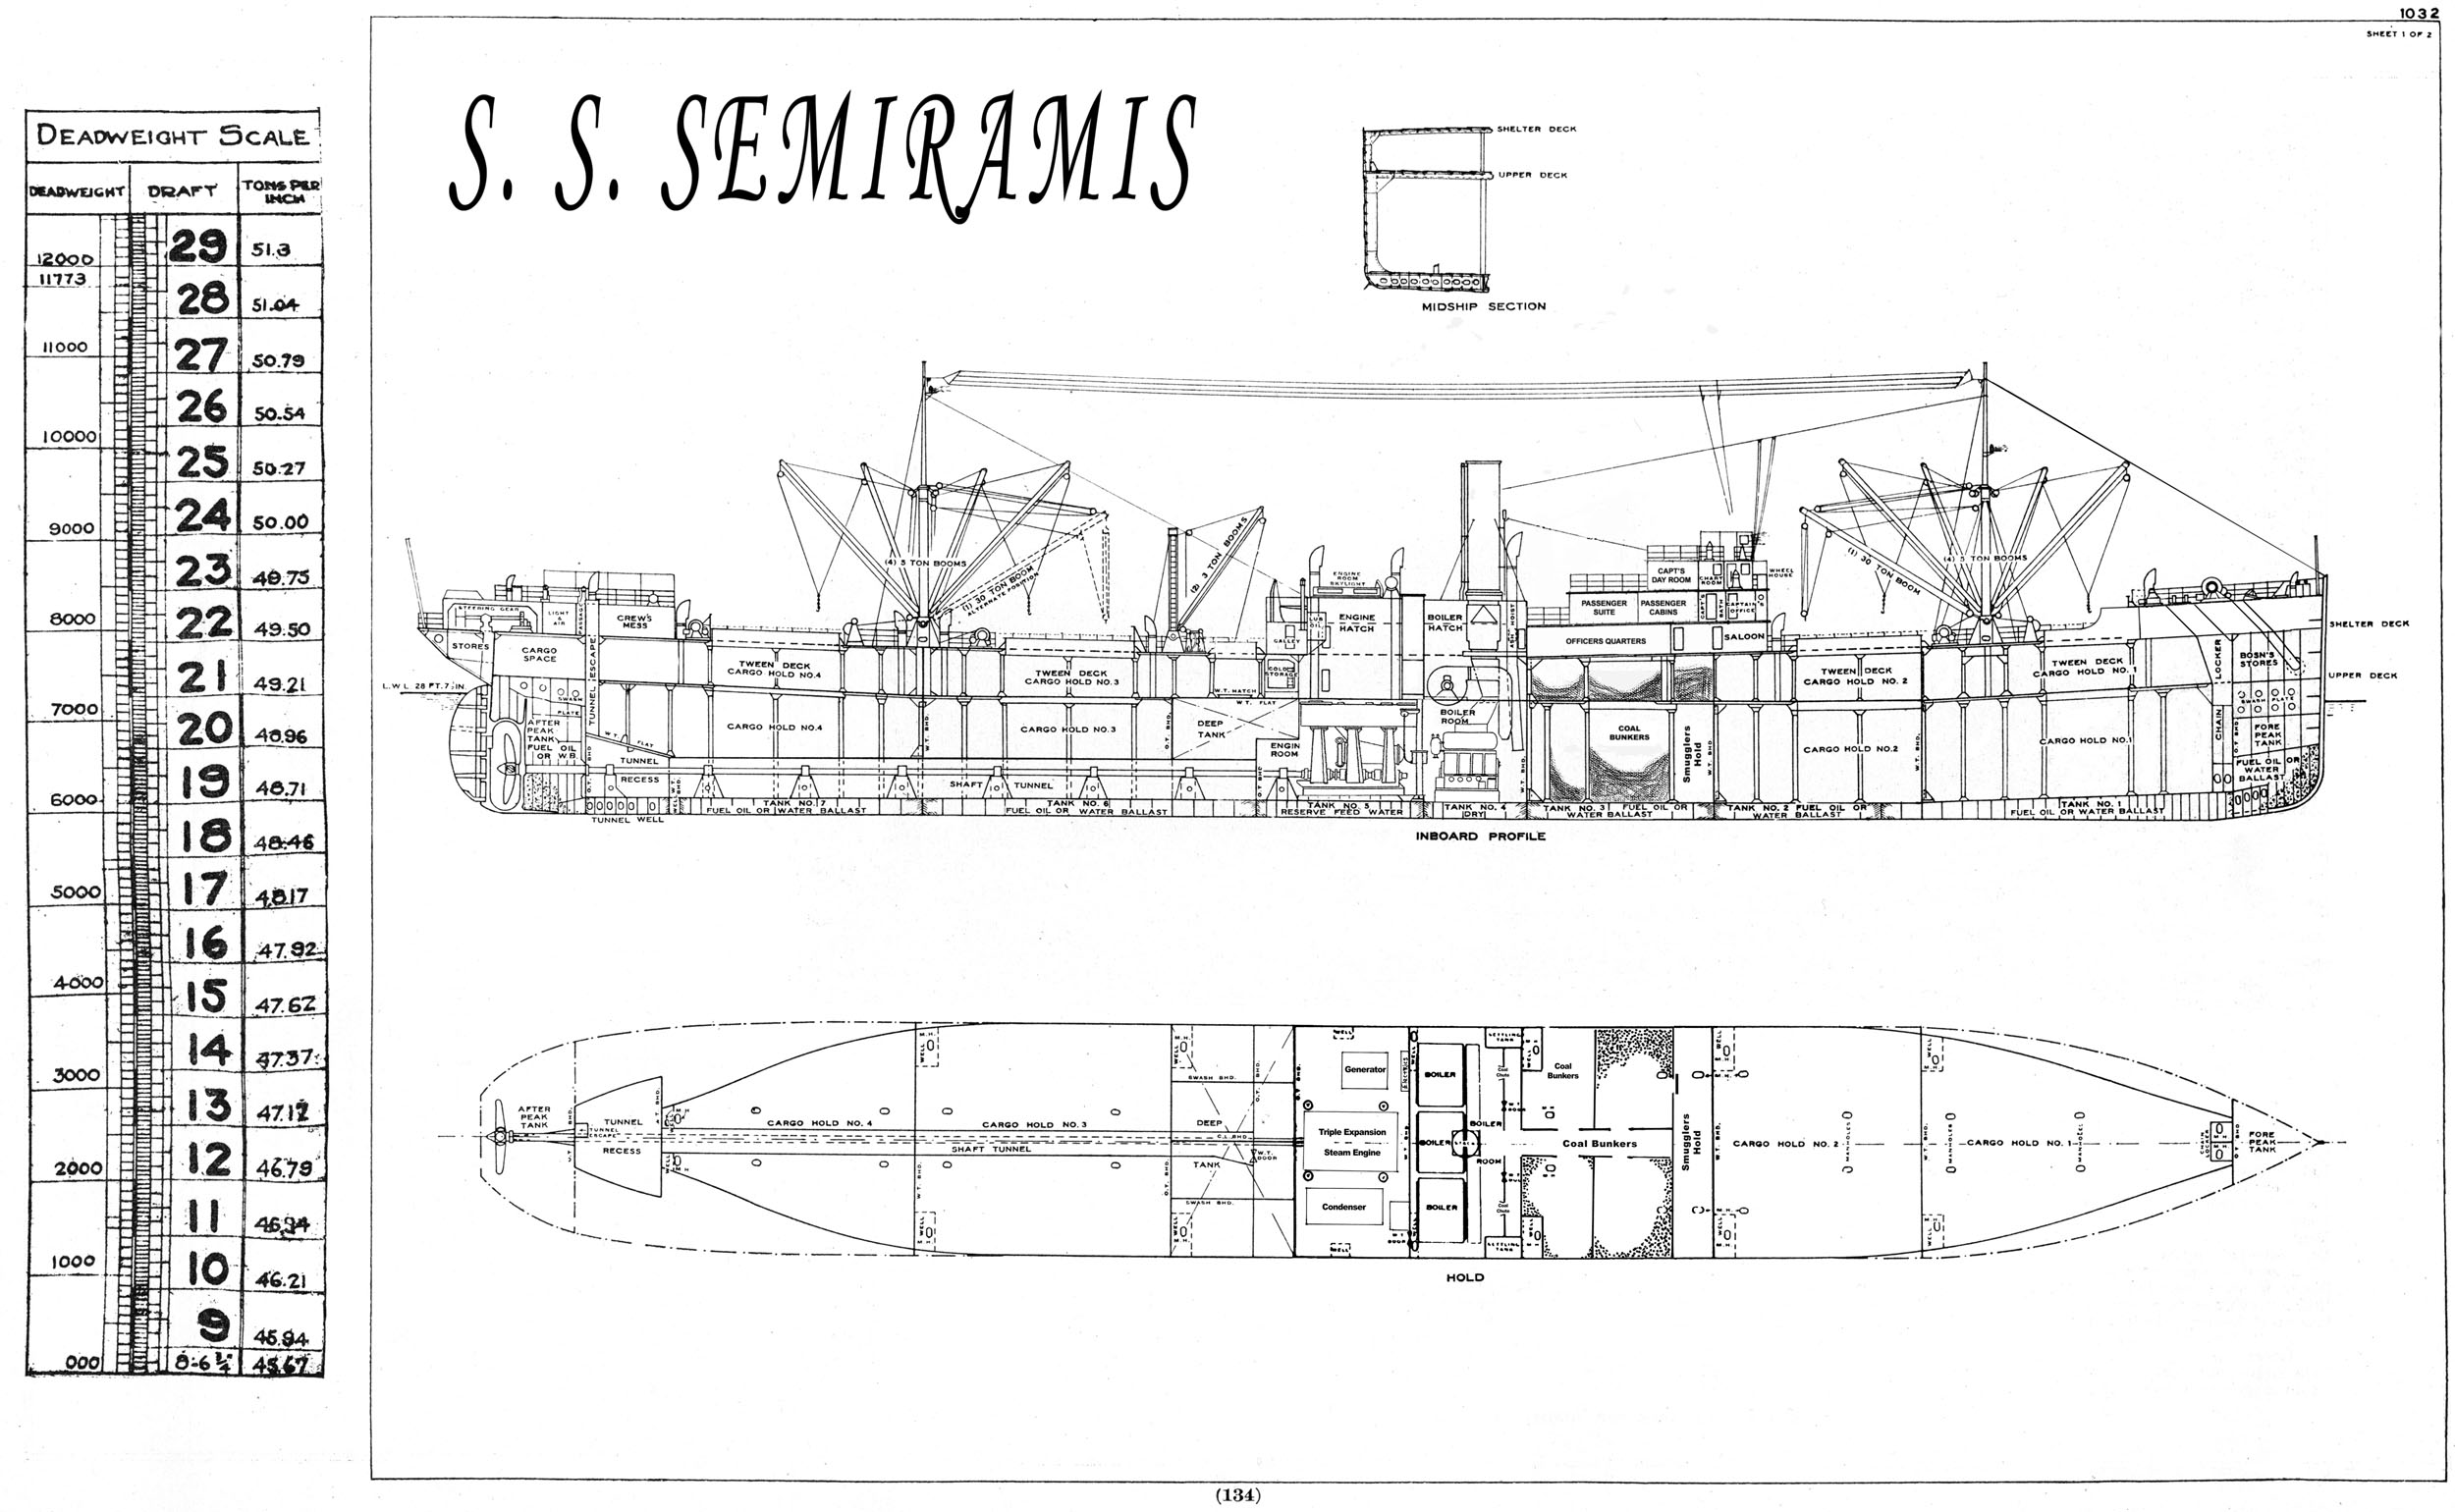 Click an Image for a close-up view of the Semiramis